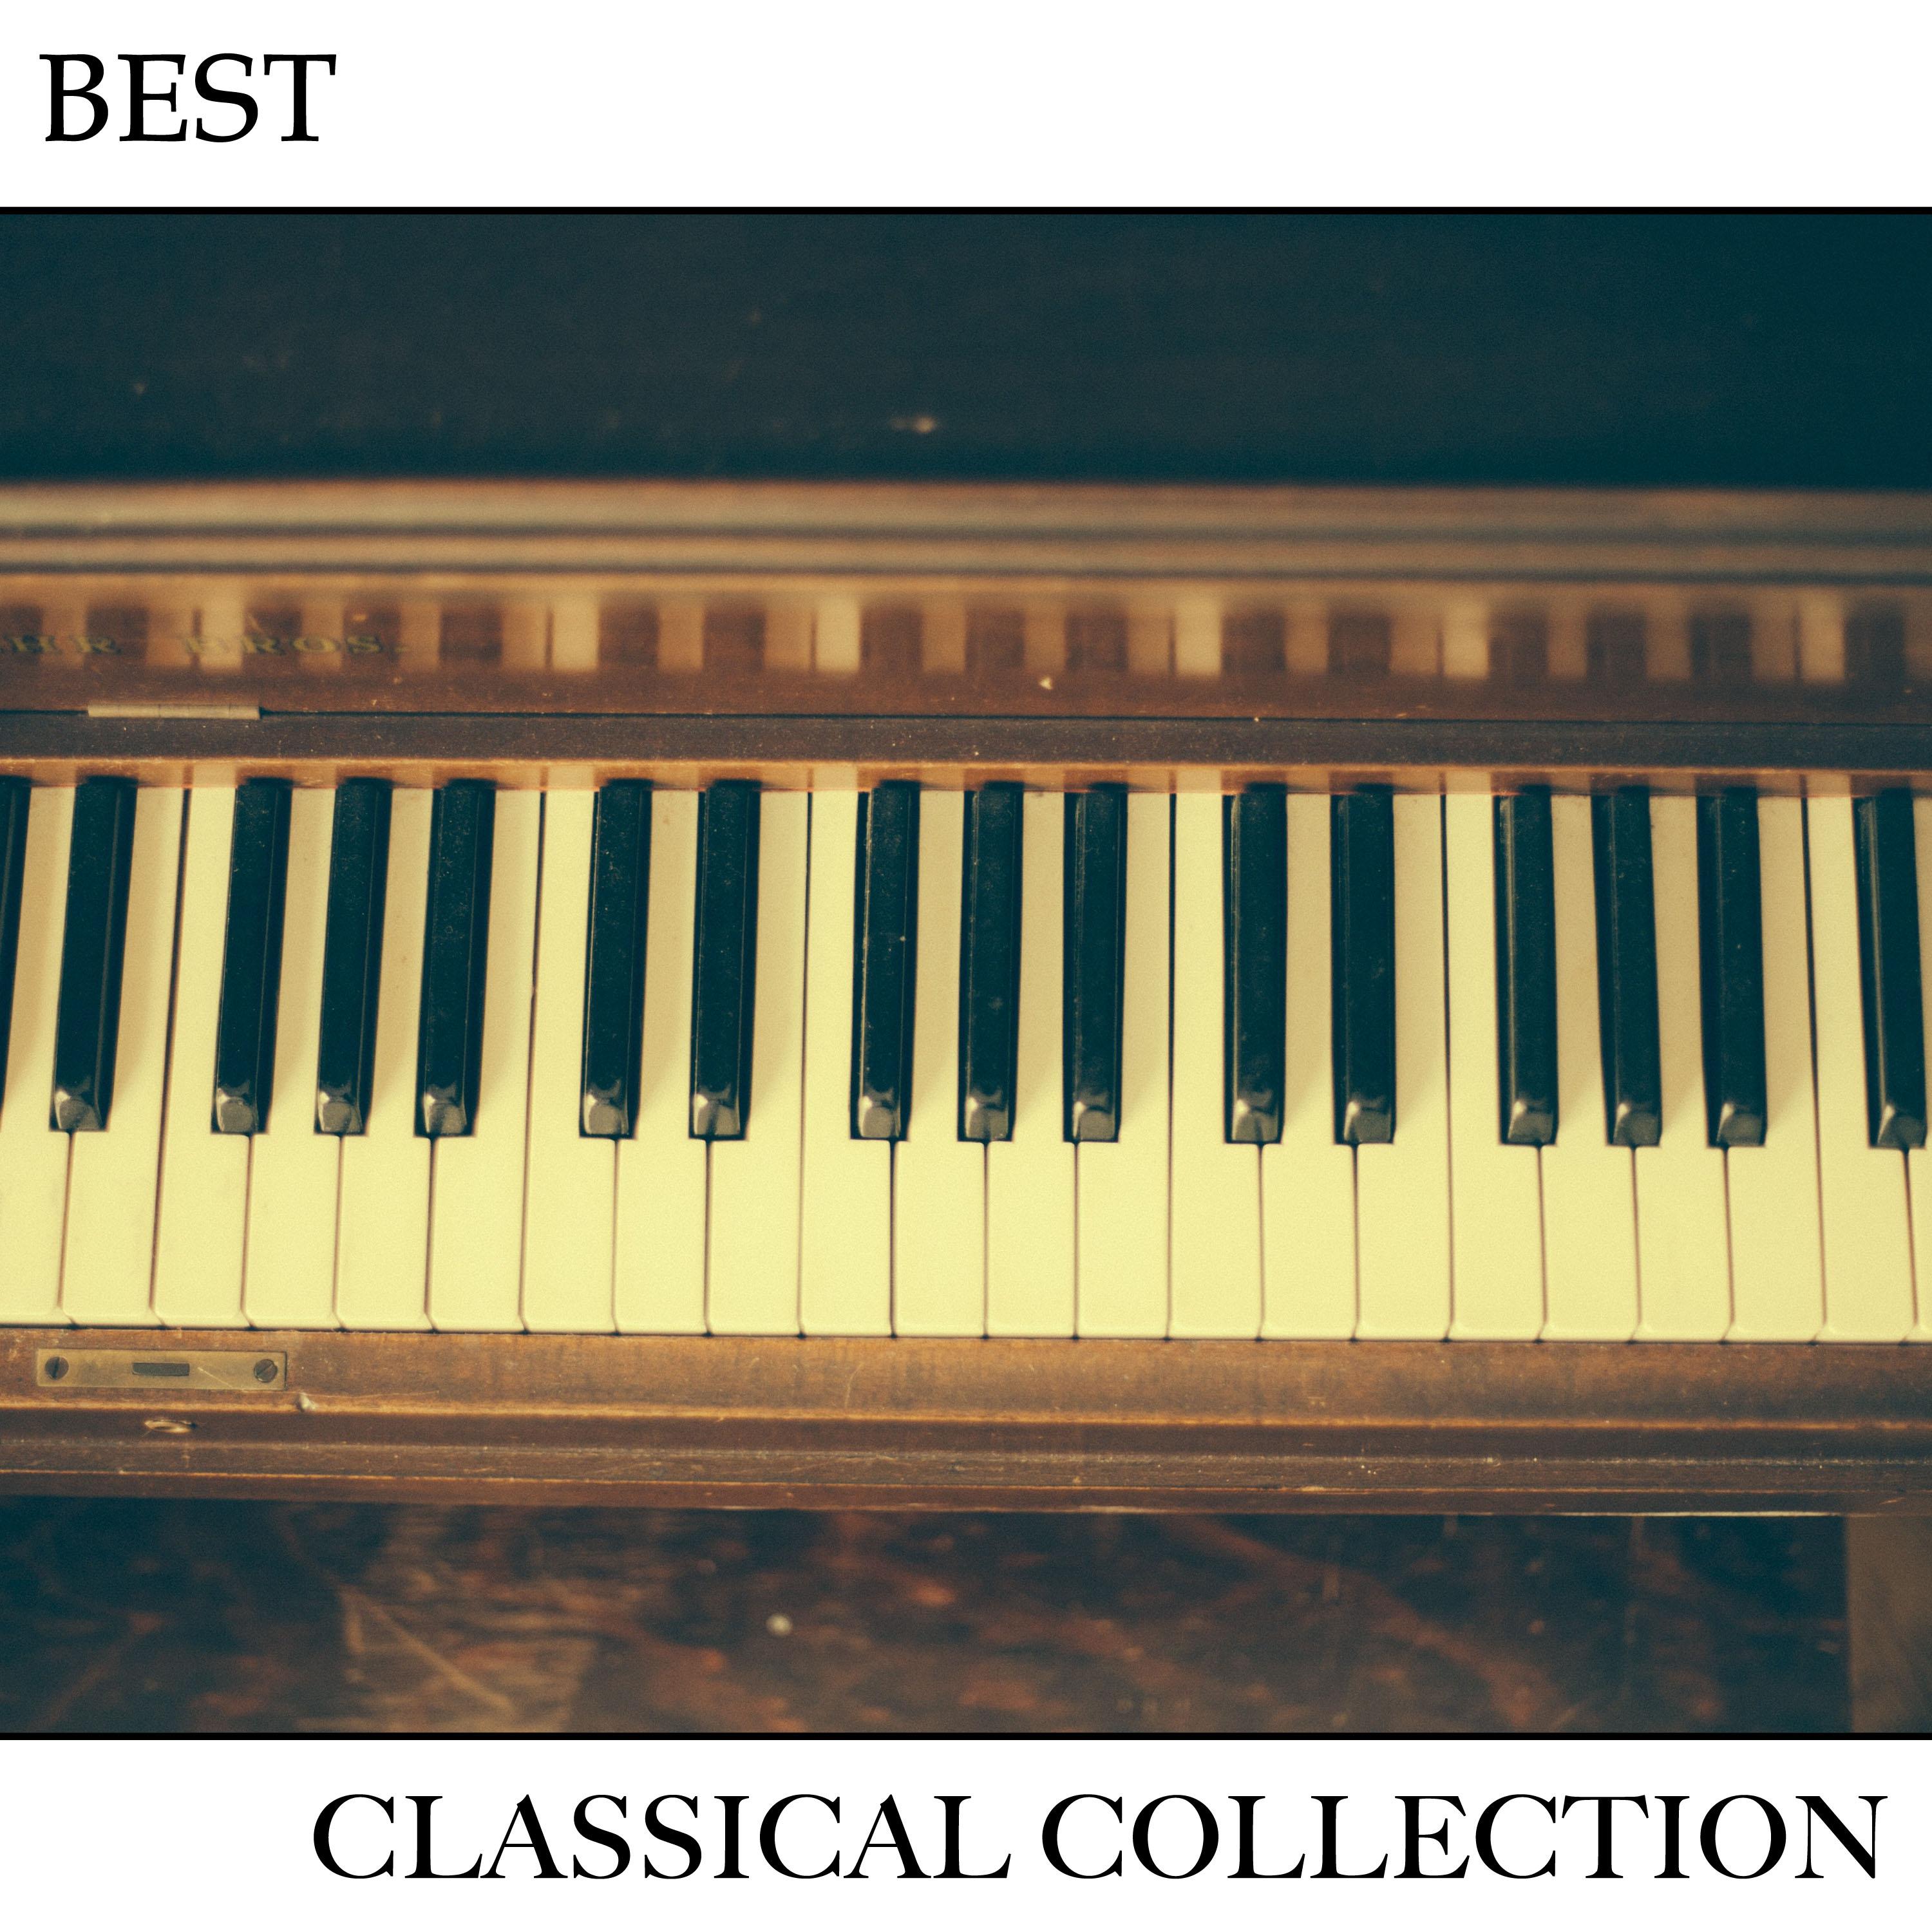 #13 Best Classical Collection